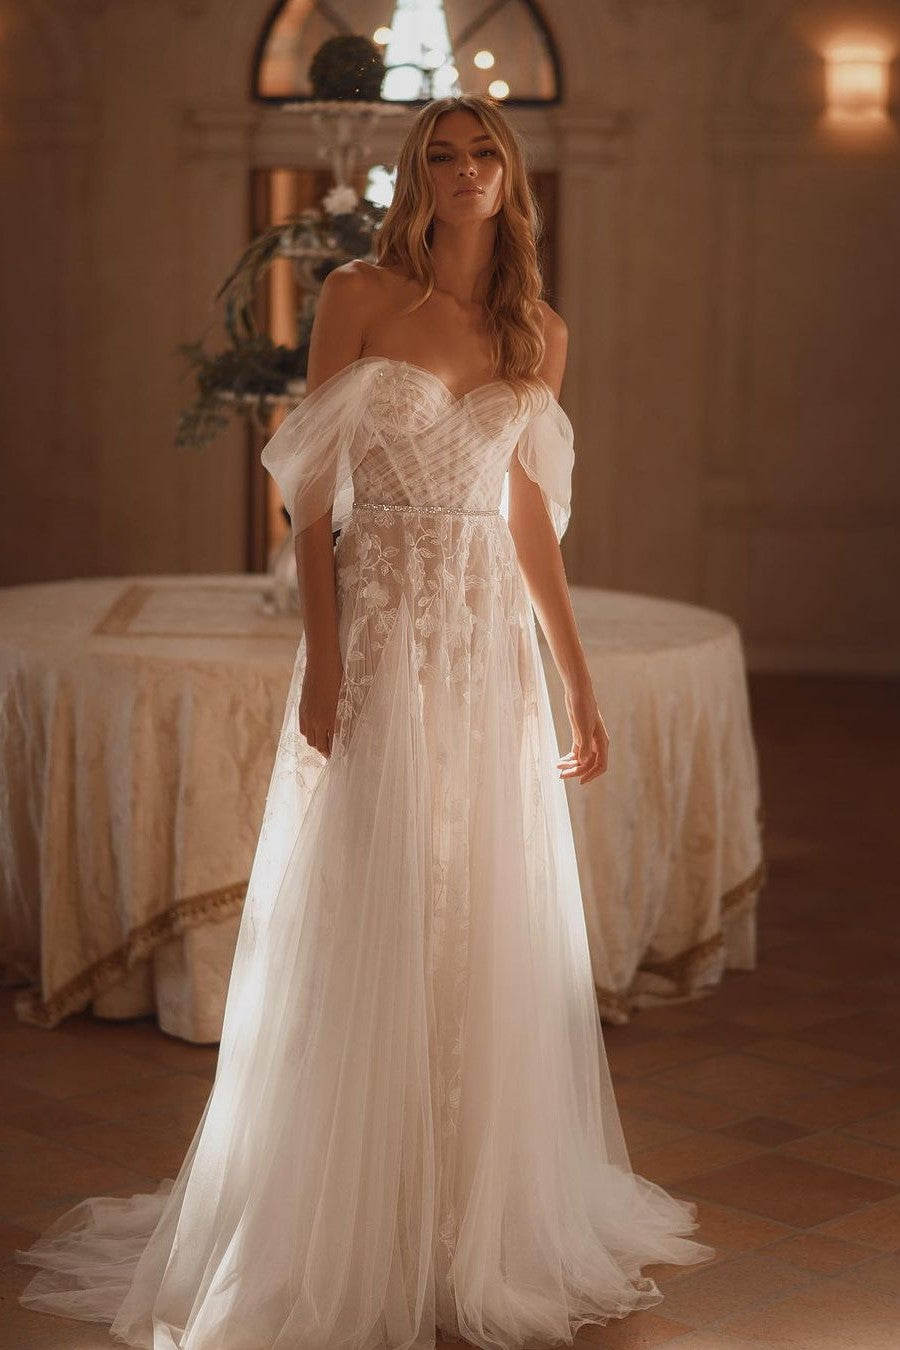 Off-the-Shoulder Corset Wedding Dress with A-line Design in Soft Tulle Fabric